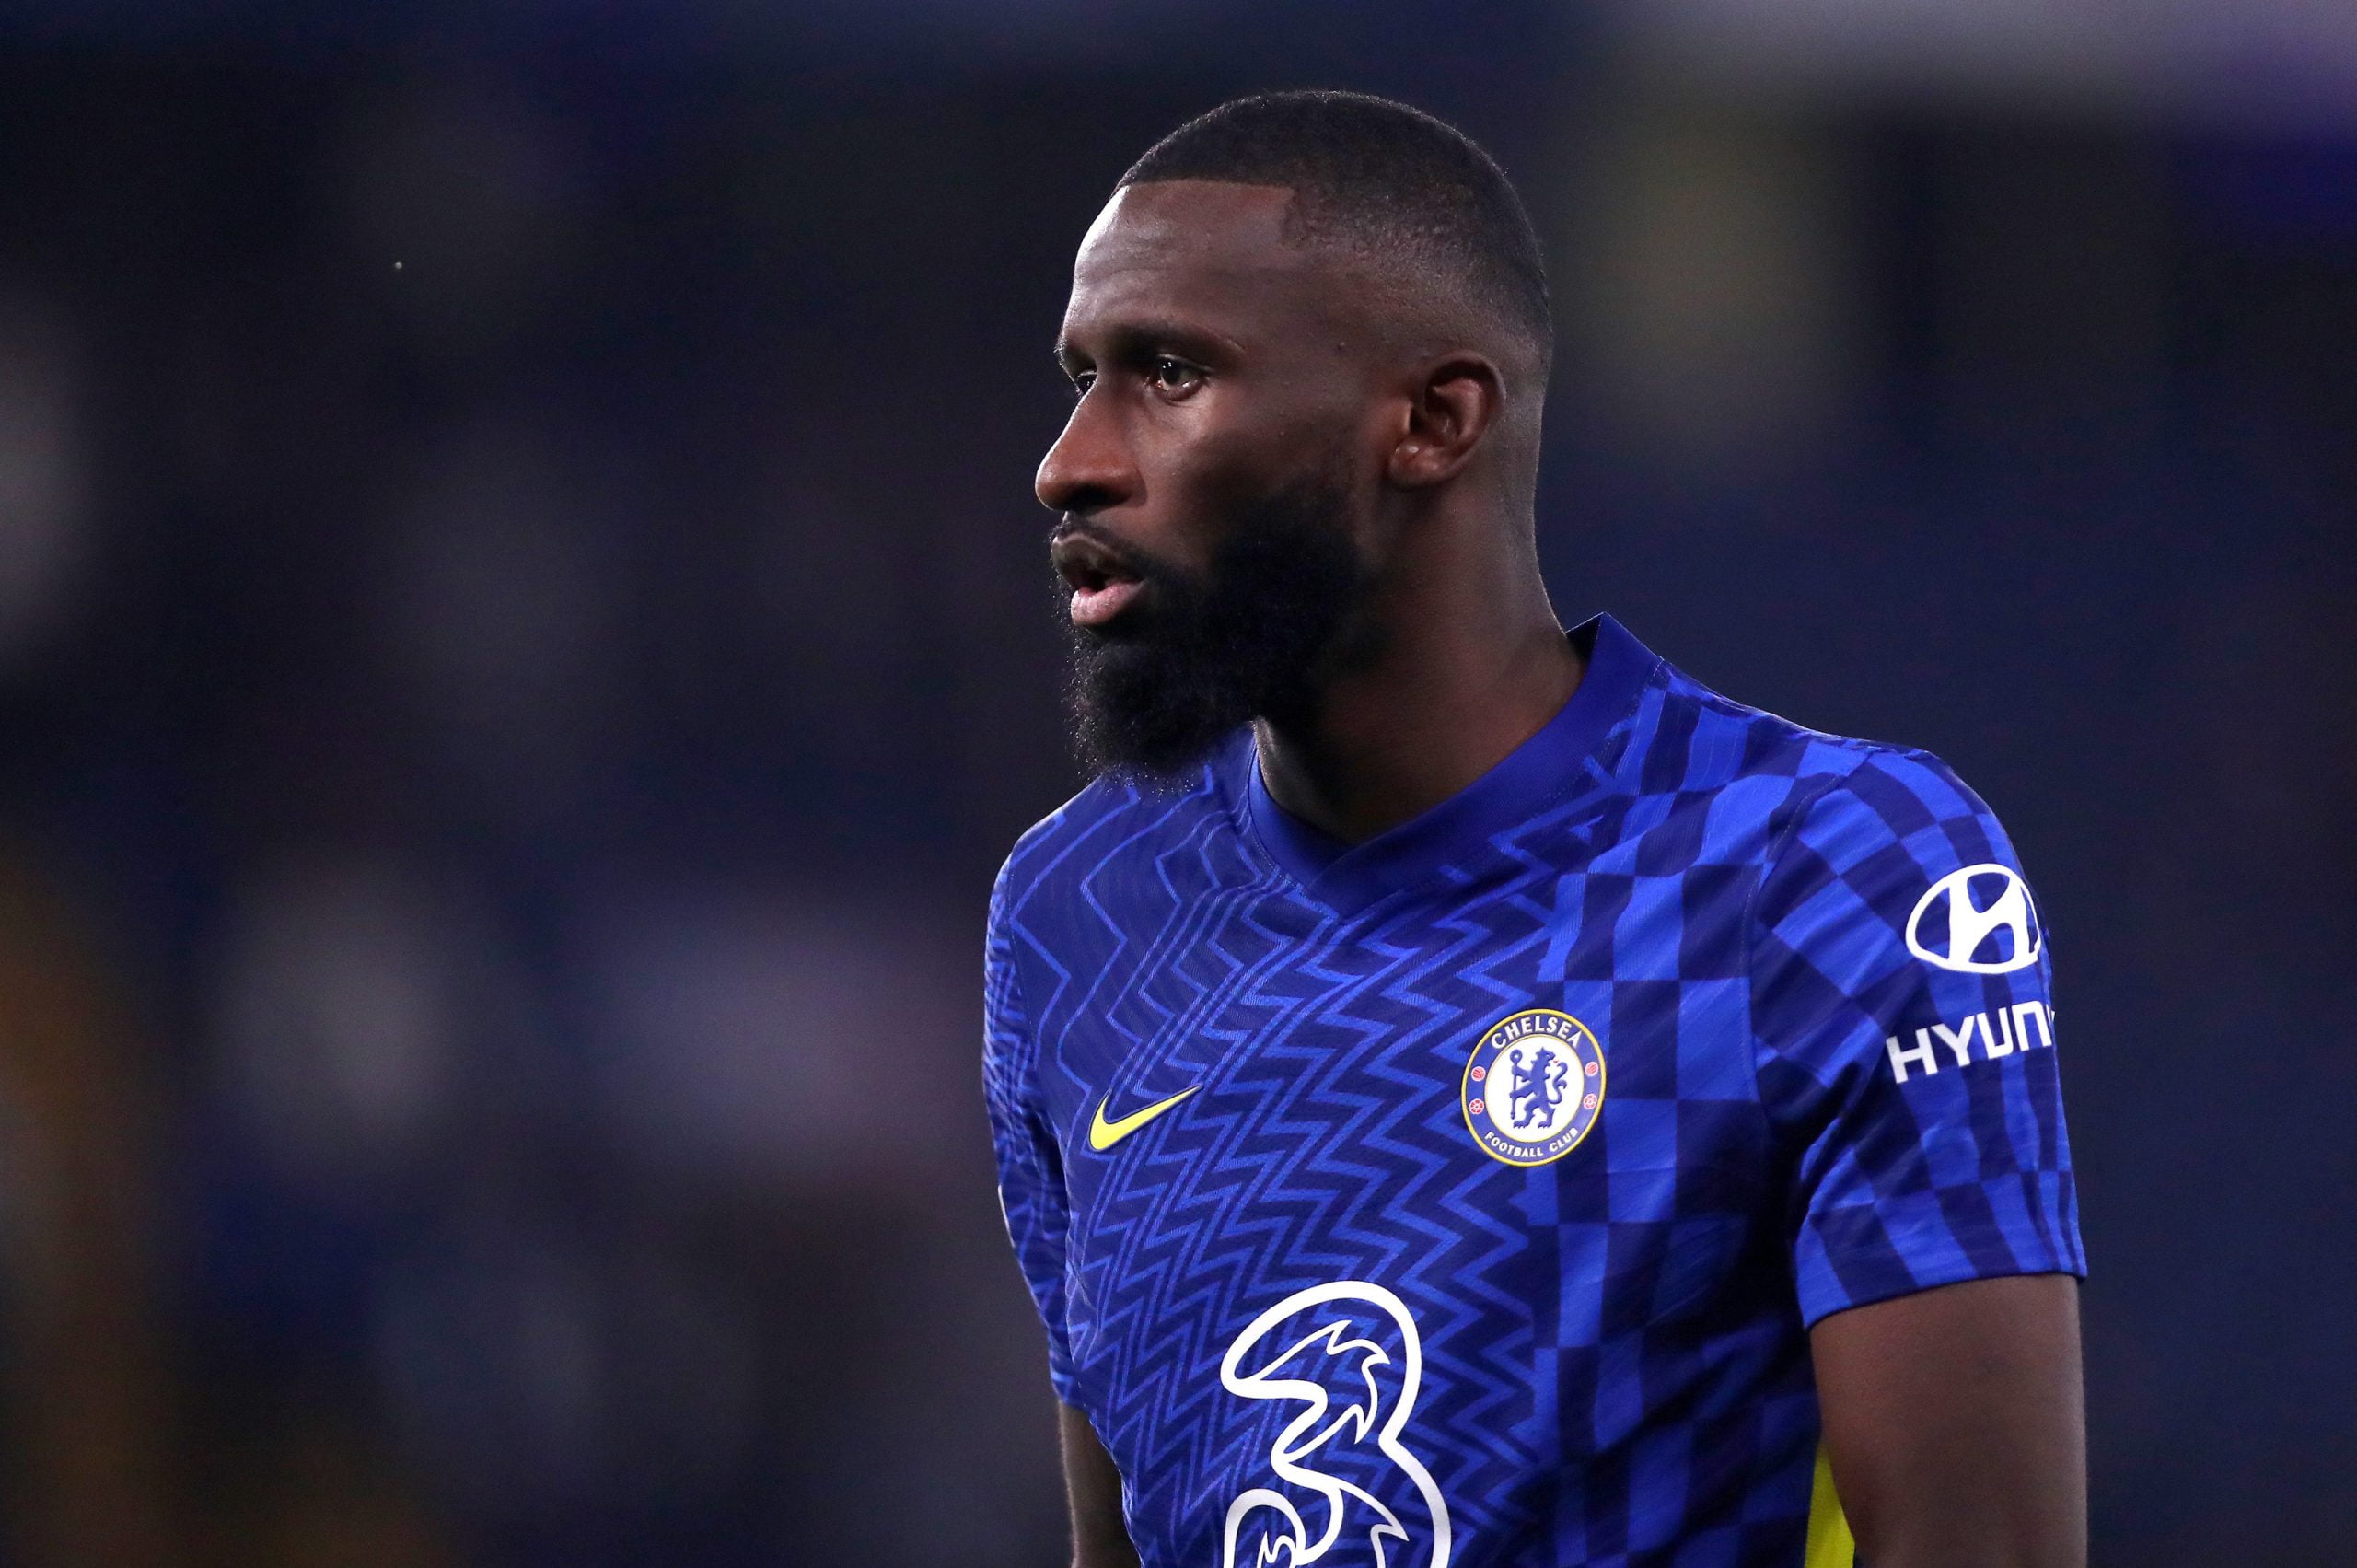 Bayern Munich's interest in me shows I'm doing well - Rudiger speaks on future